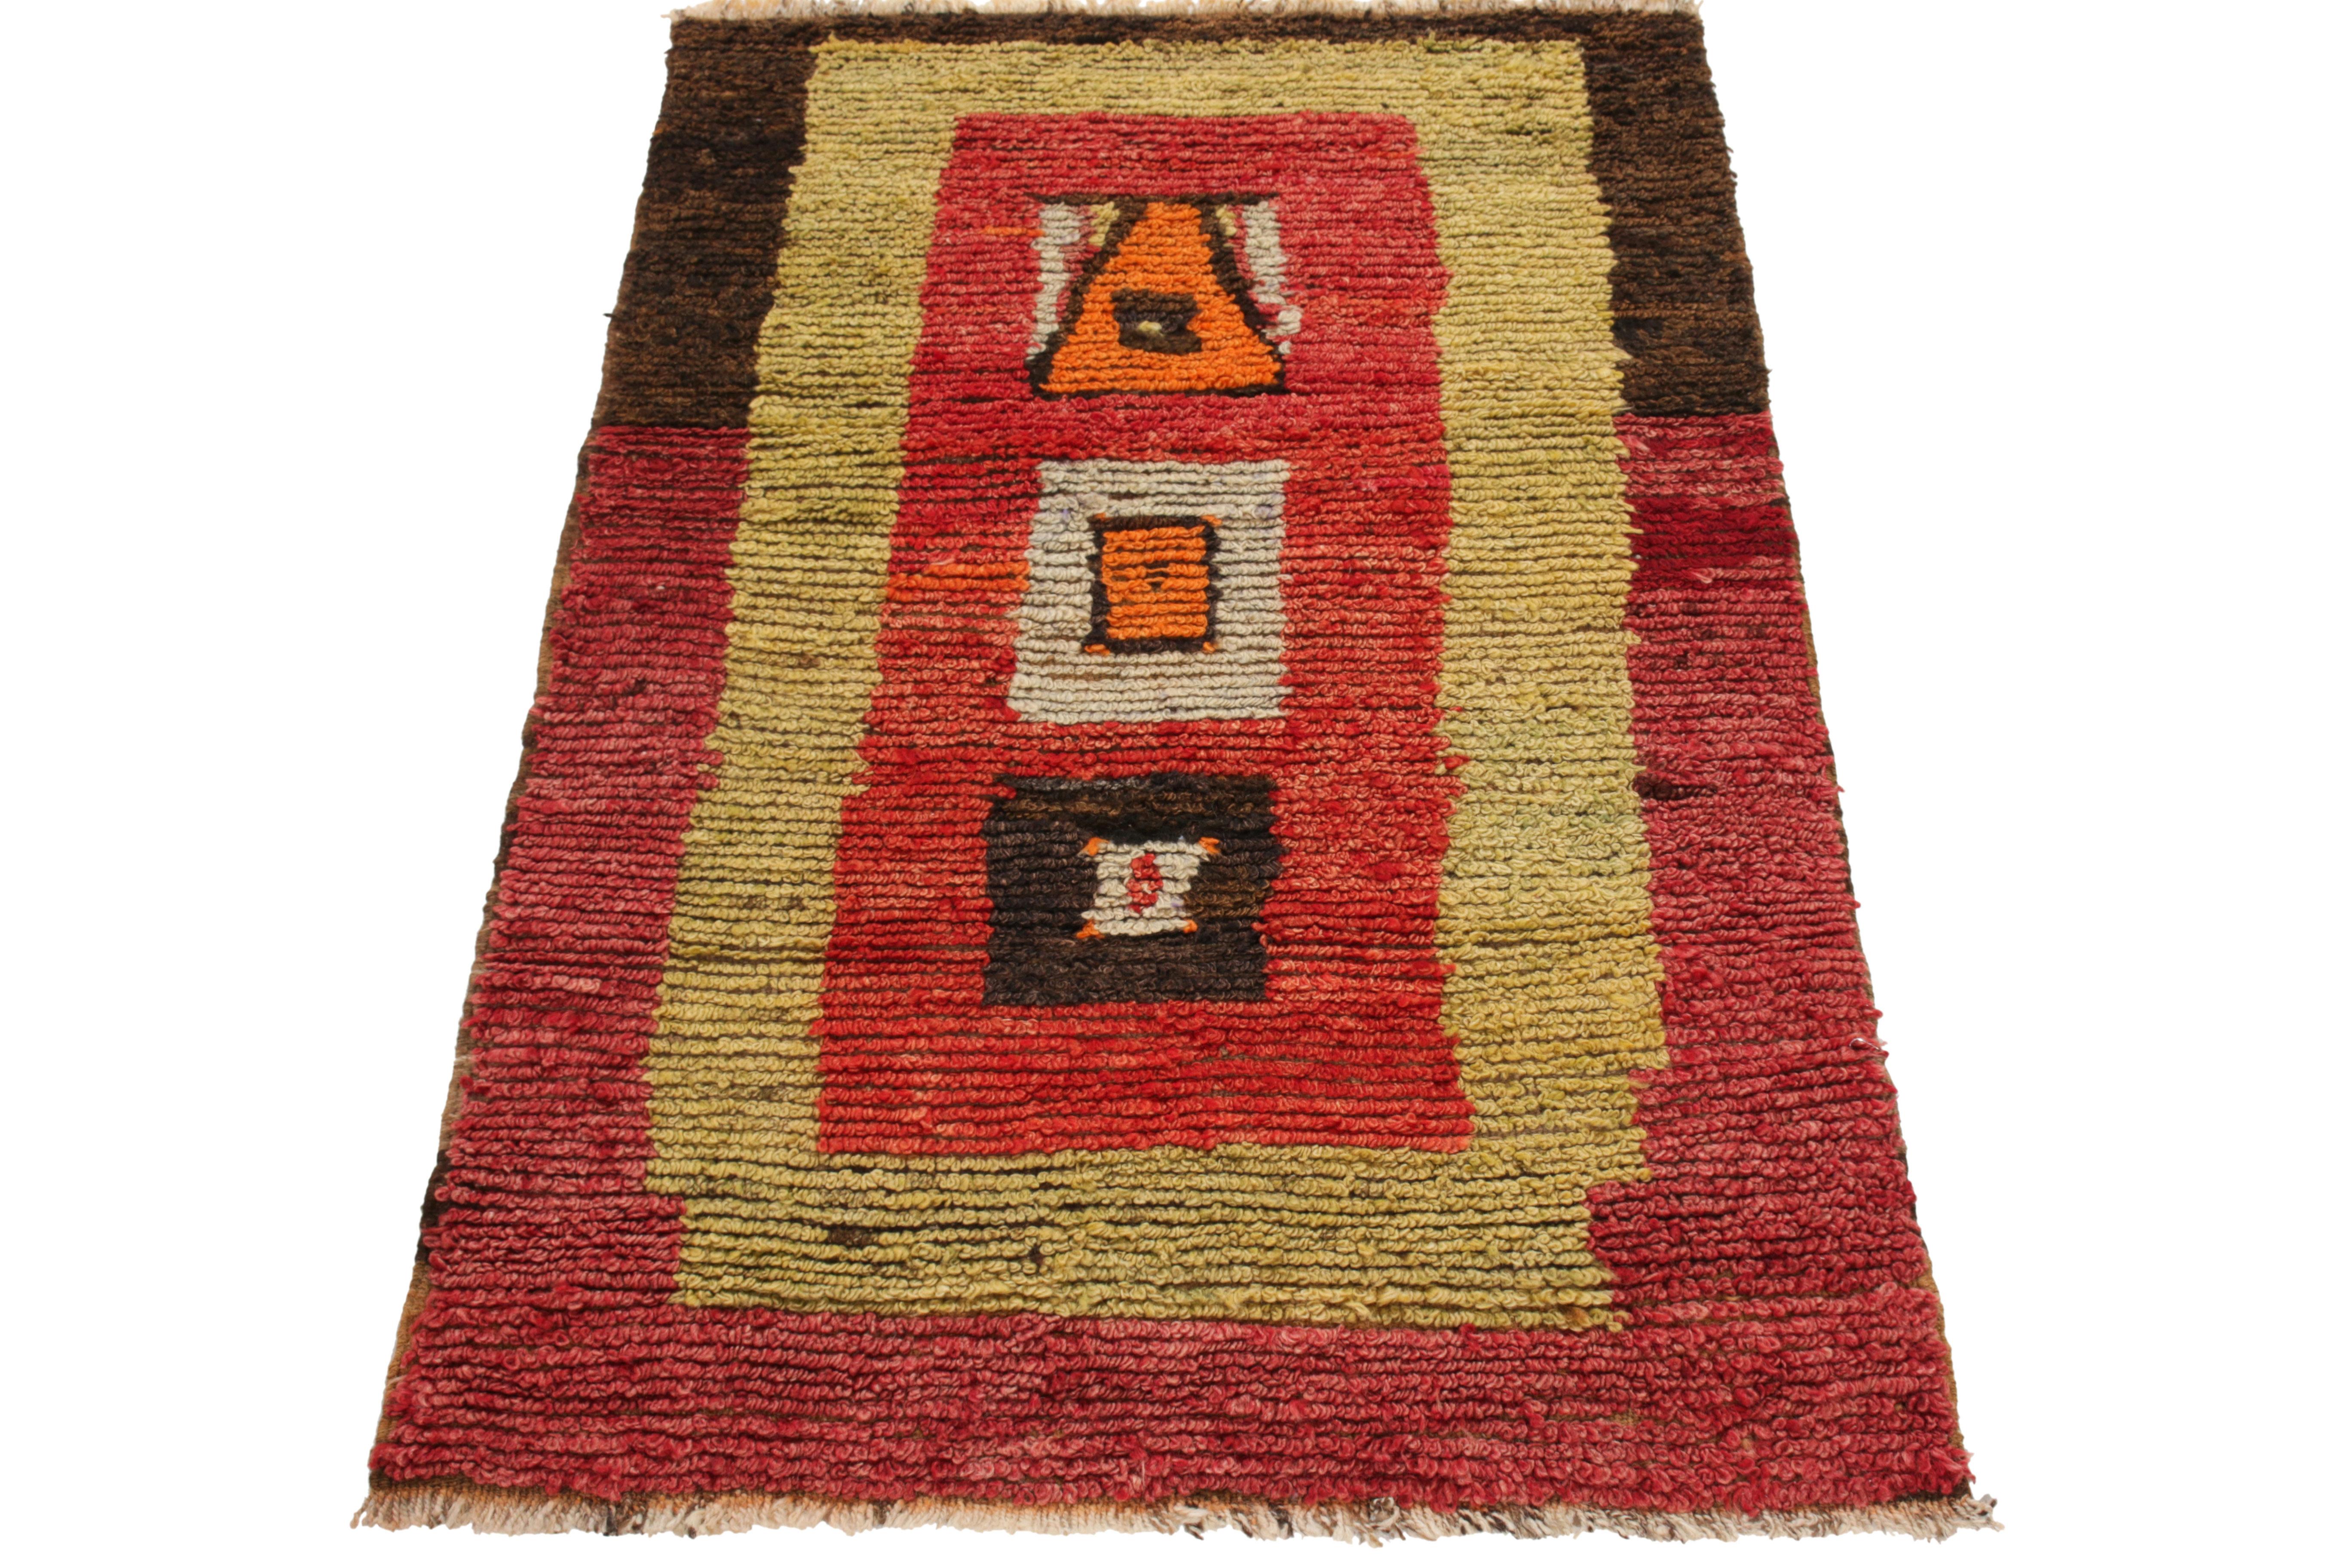 From Rug & Kilim’s Antique & Vintage collection, a 3x5 Turkish Tulu rug casting a clean tribal geometric pattern. Hand-knotted in wool, the 1950s nomadic style drawing enjoys a rustic appeal in tones of scarlet & vermilion red, yellow, brown-black